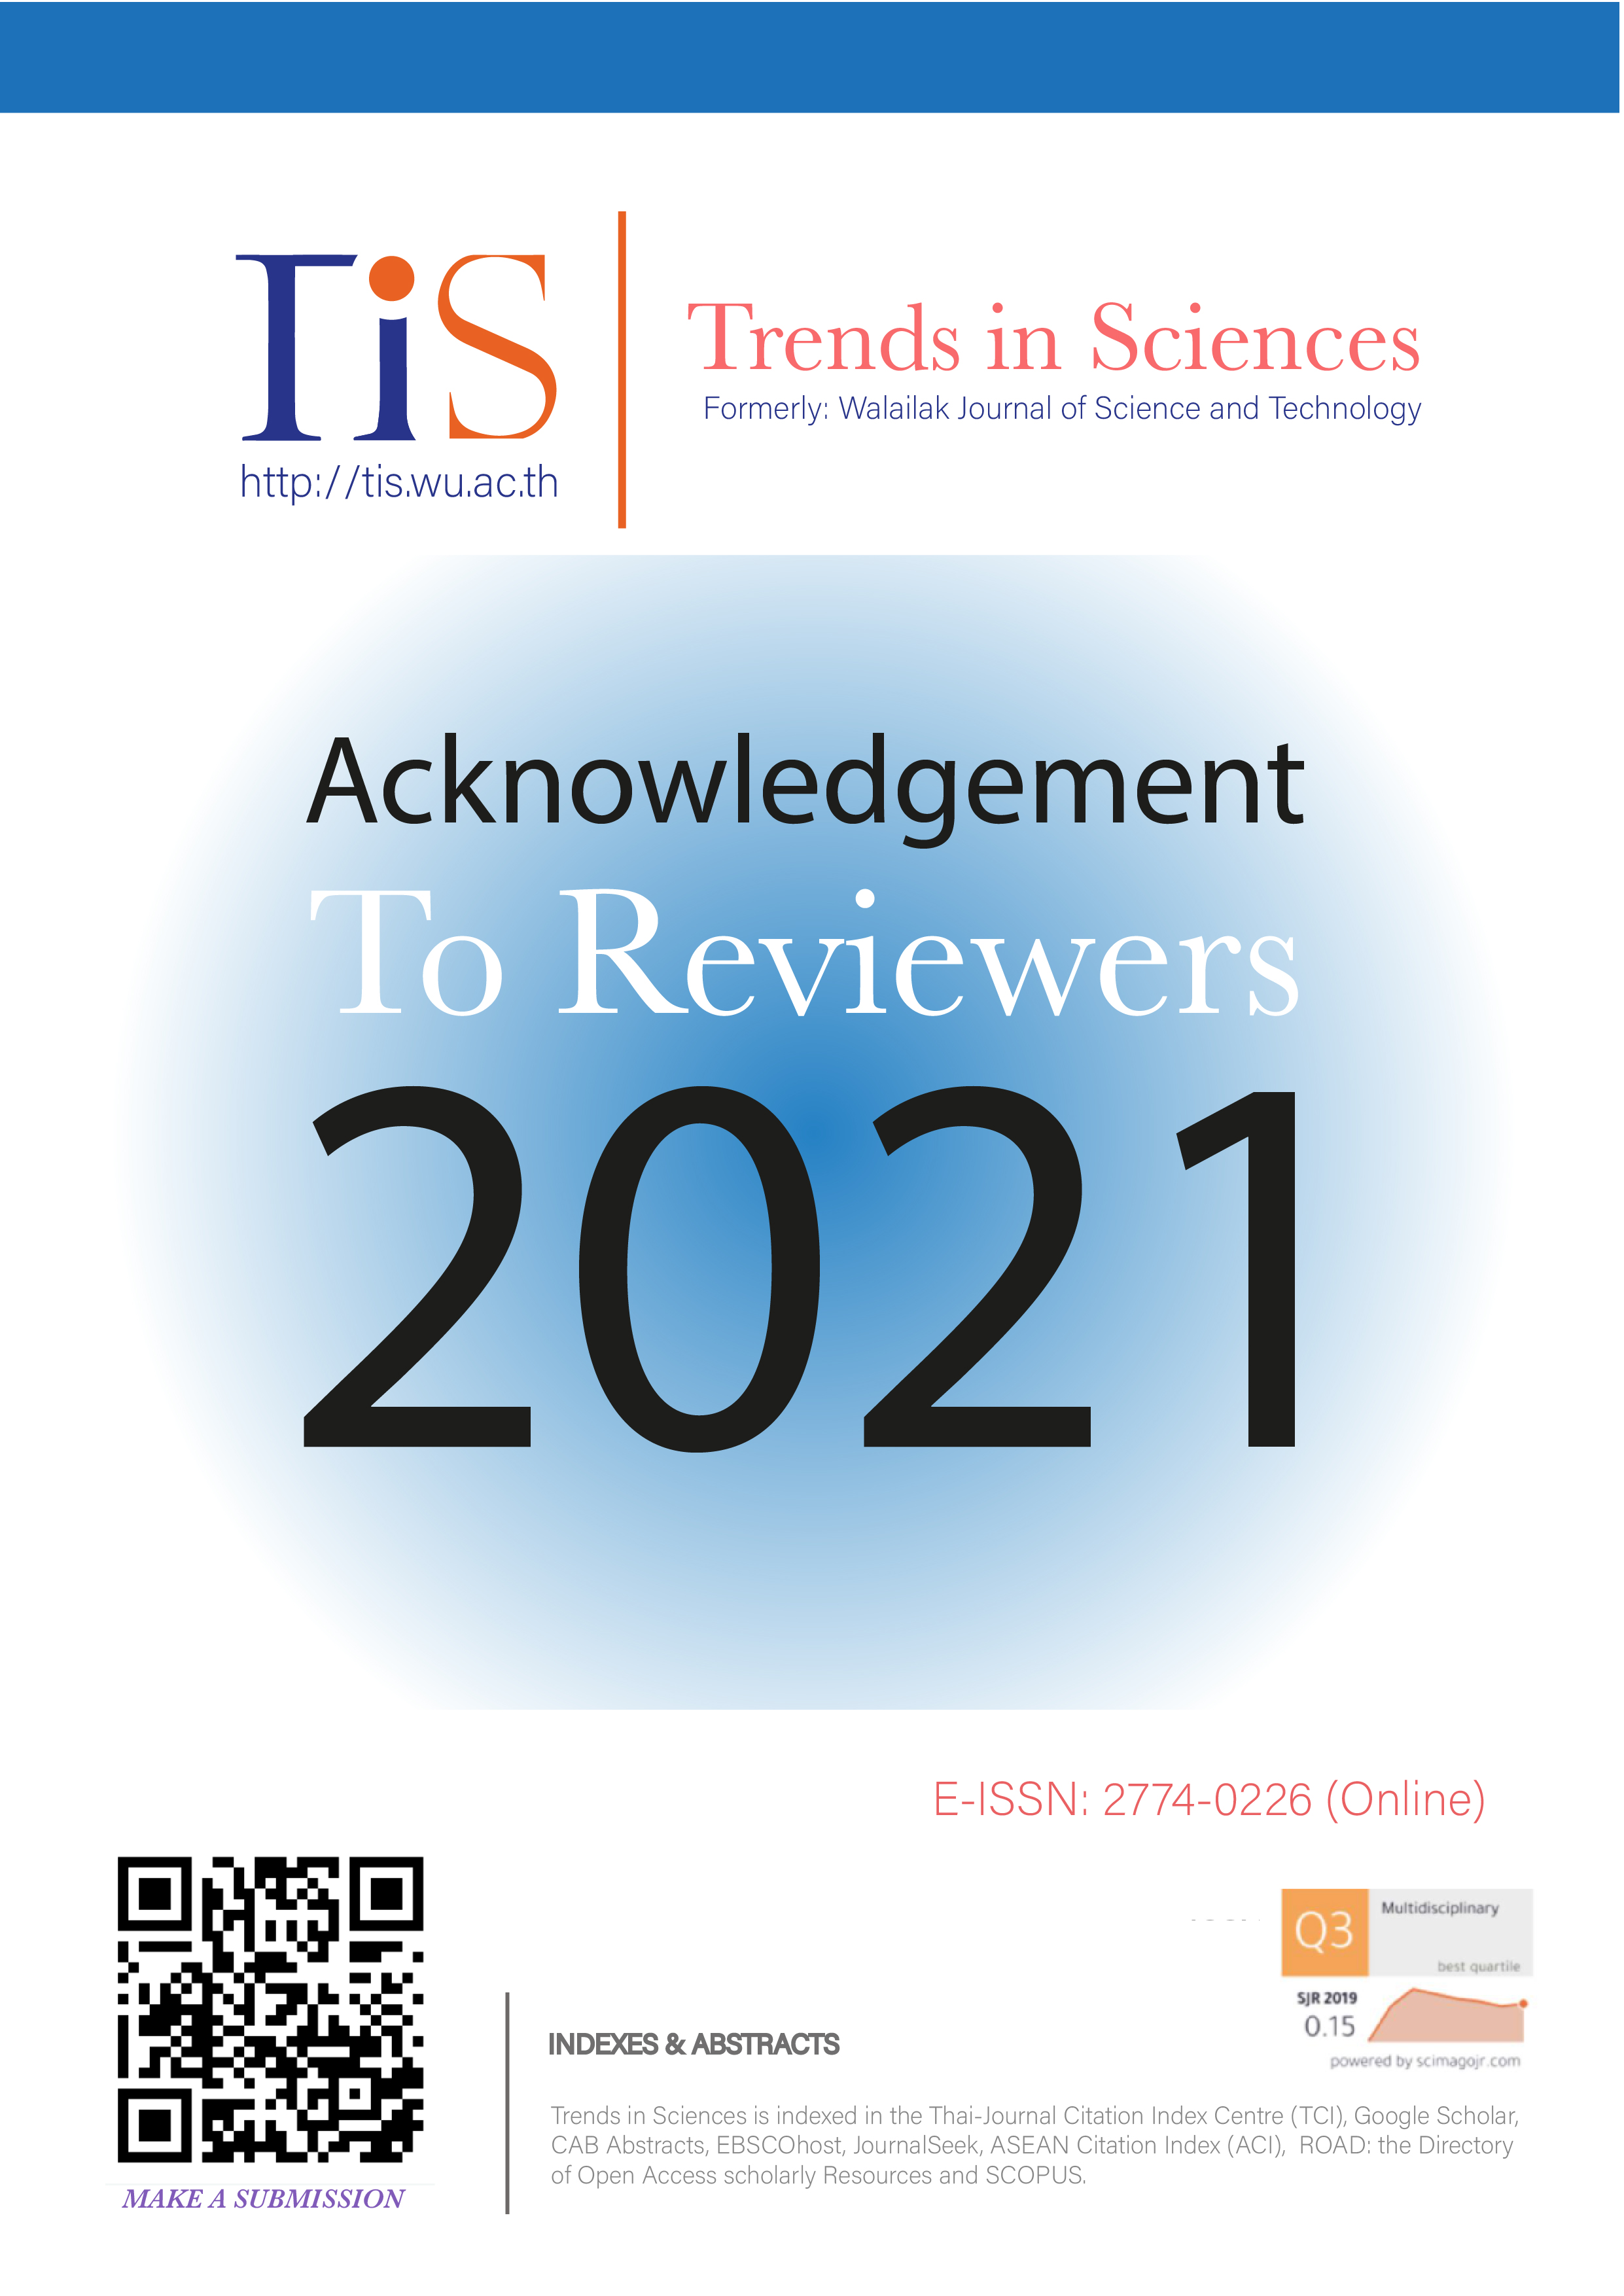 					View Acknowledgement to Reviewers in 2021
				